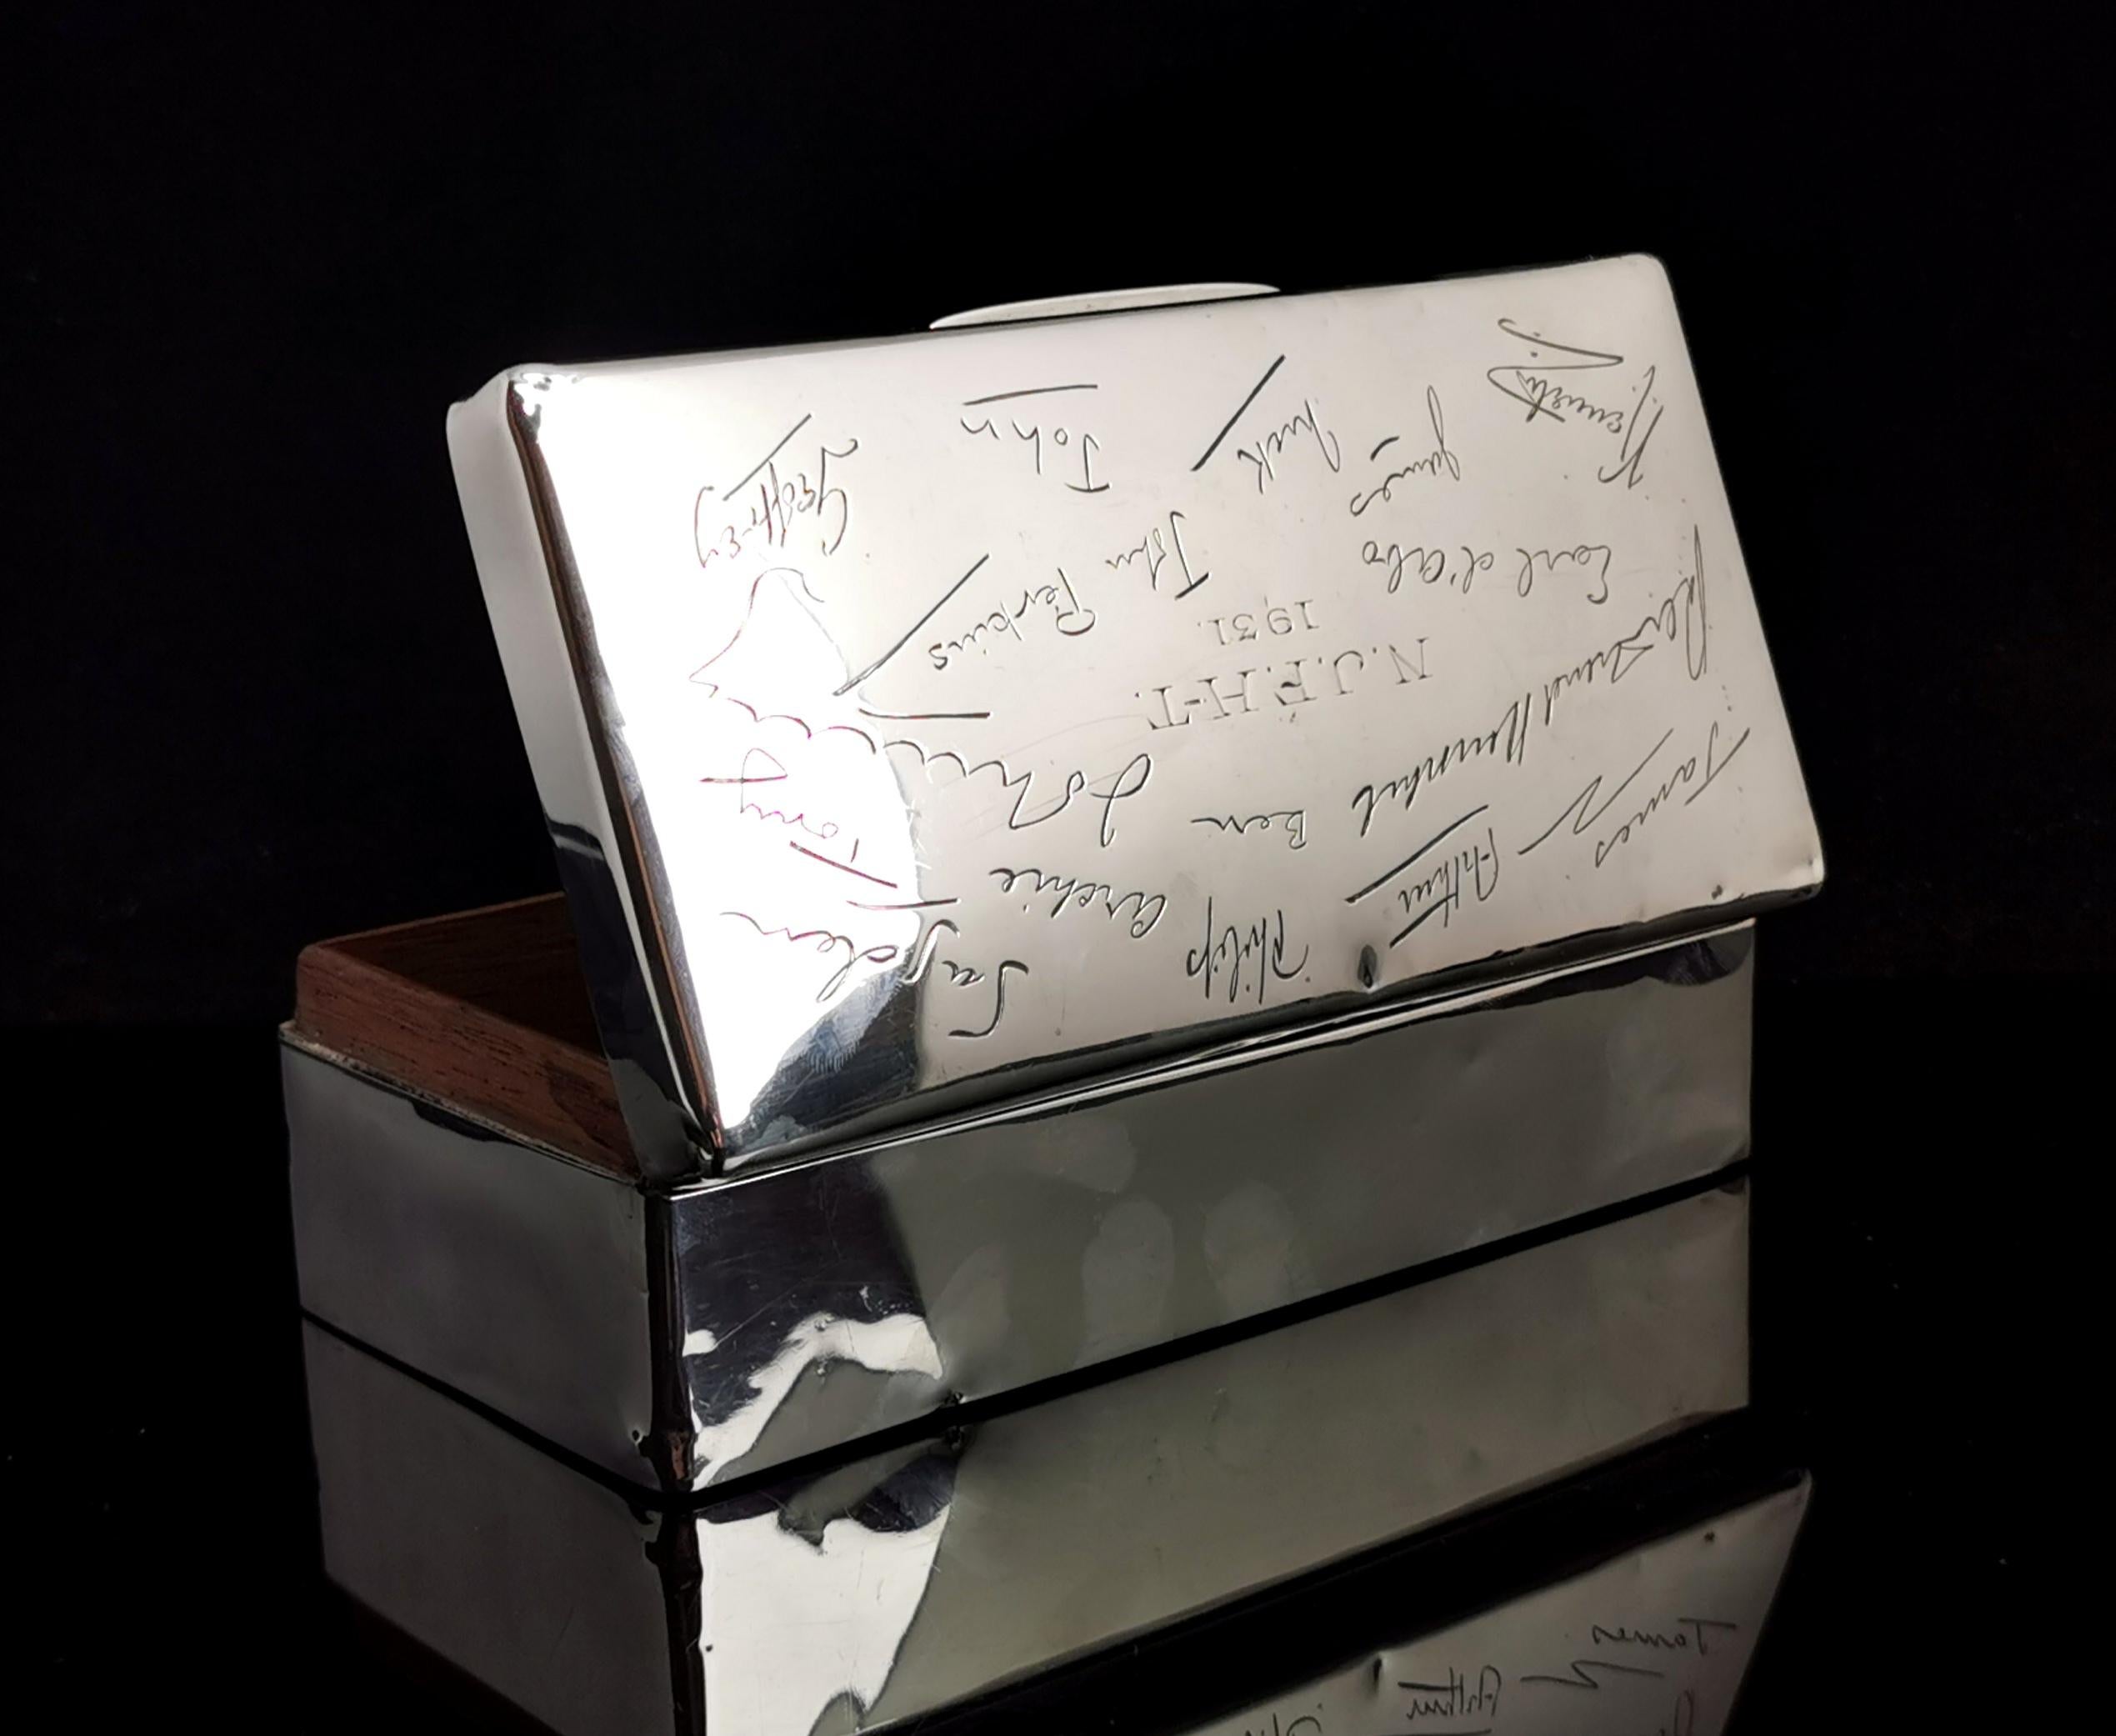 A superb and very interesting vintage 1930's sterling silver cigarette box.

Made from heavy sterling silver with an all over engraved lid, the fantastic thing about this box is that it has been engraved with the individual signatures of people,